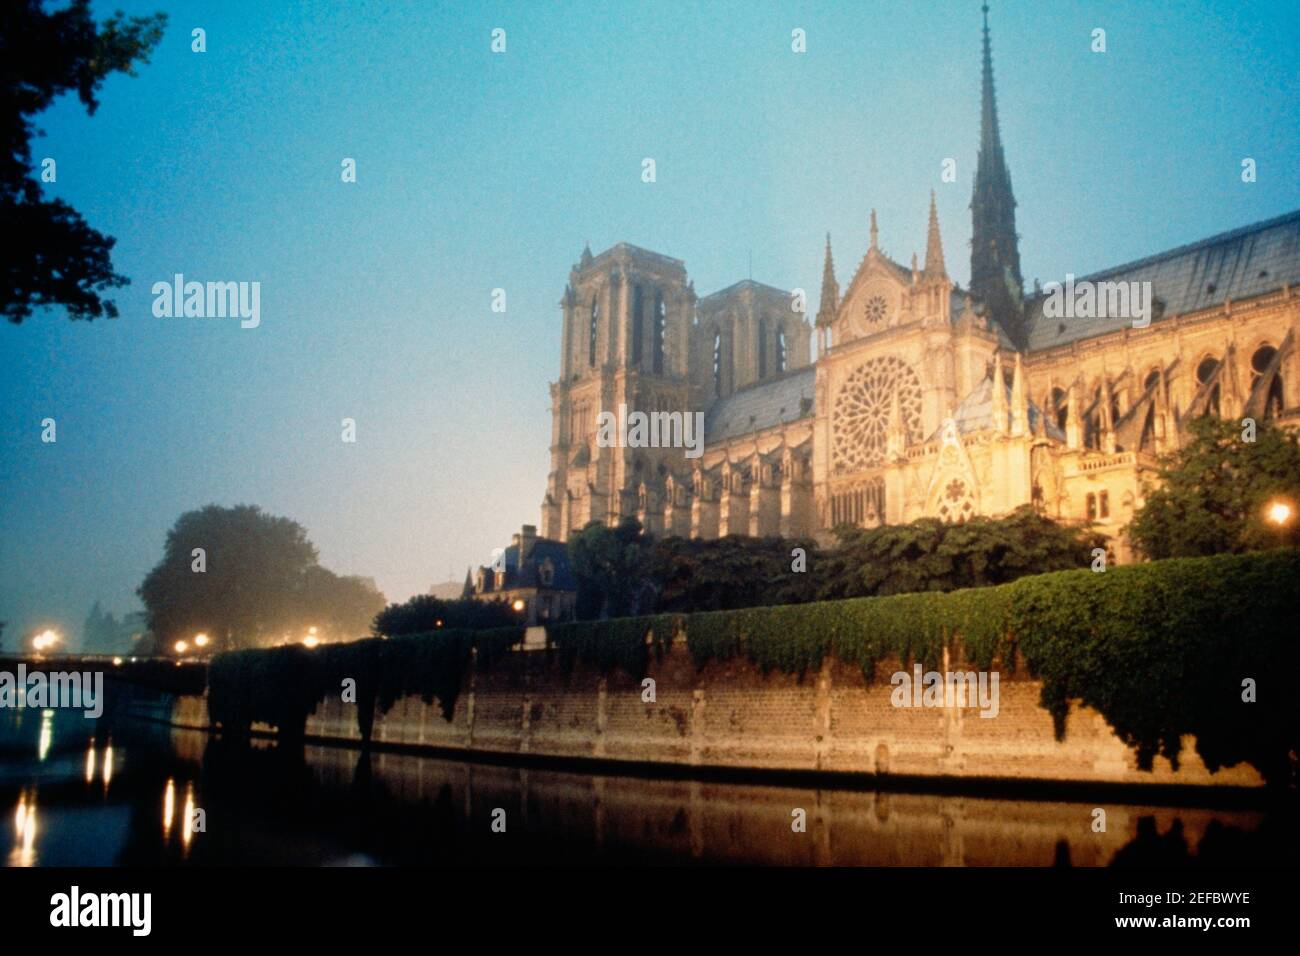 Side view of Notredame Cathedral near a river, Paris, France Stock Photo